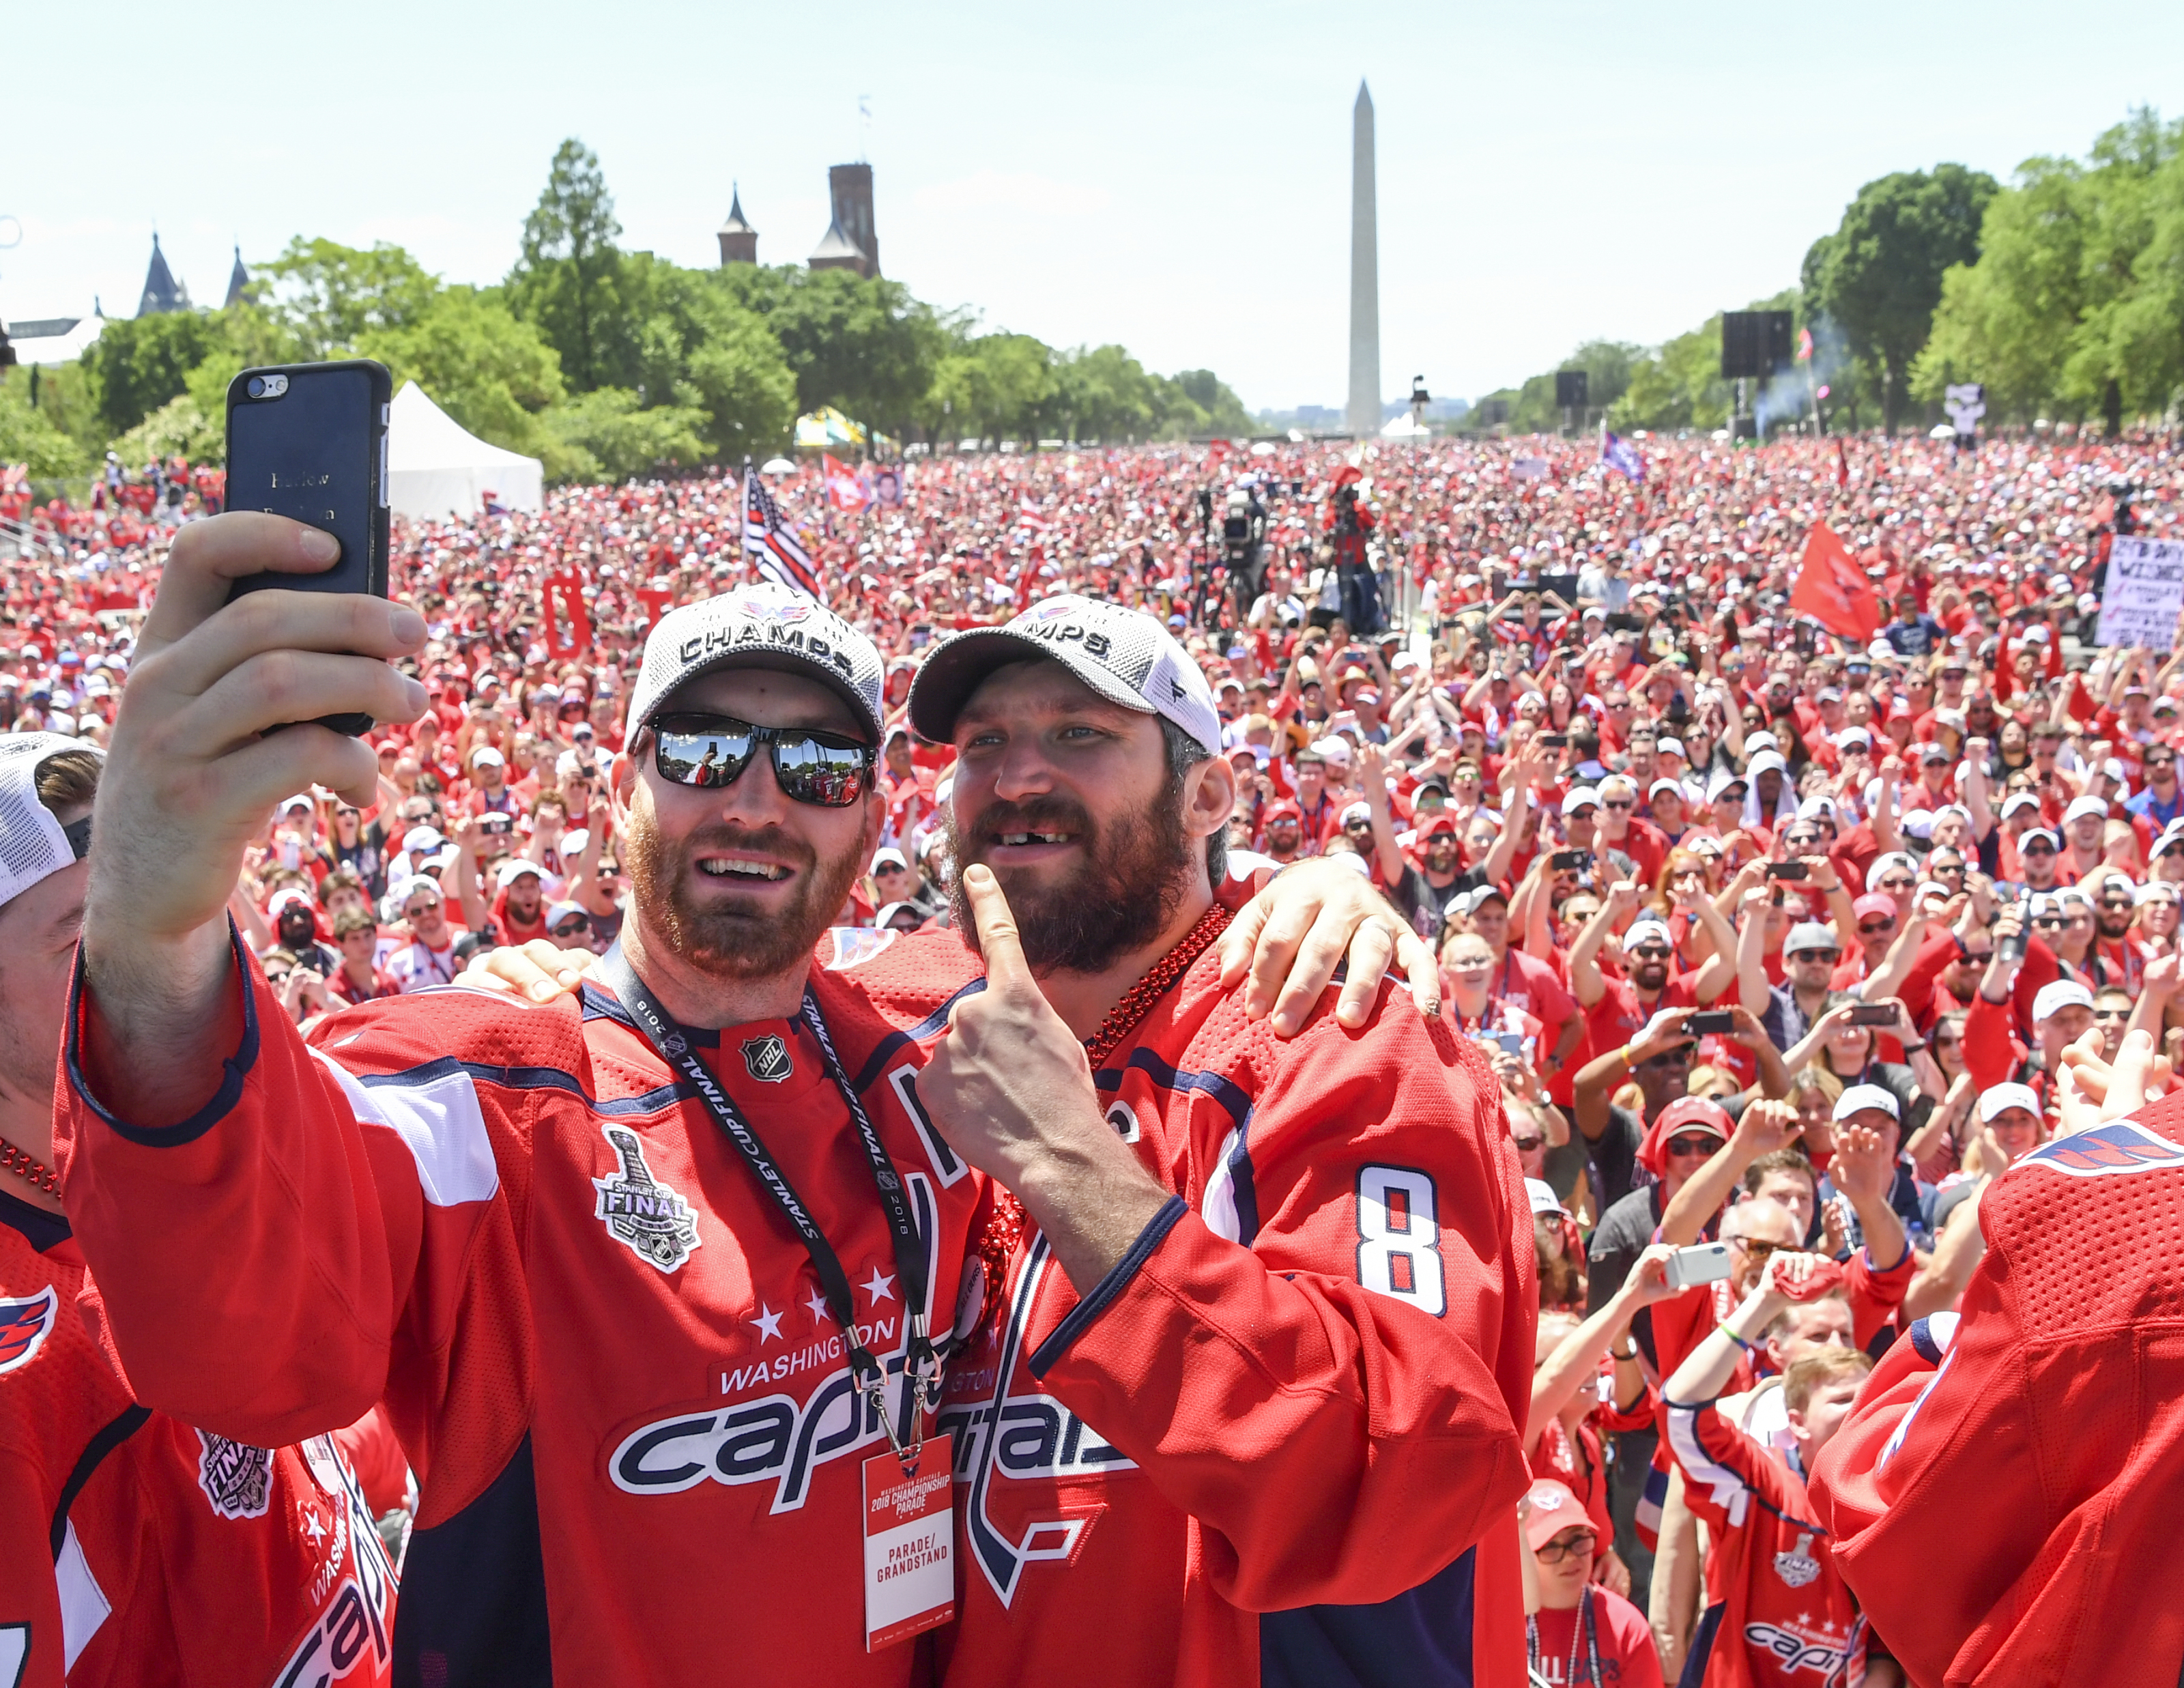 Thousands of fans celebrate the Washington Capitals' 1st Stanley